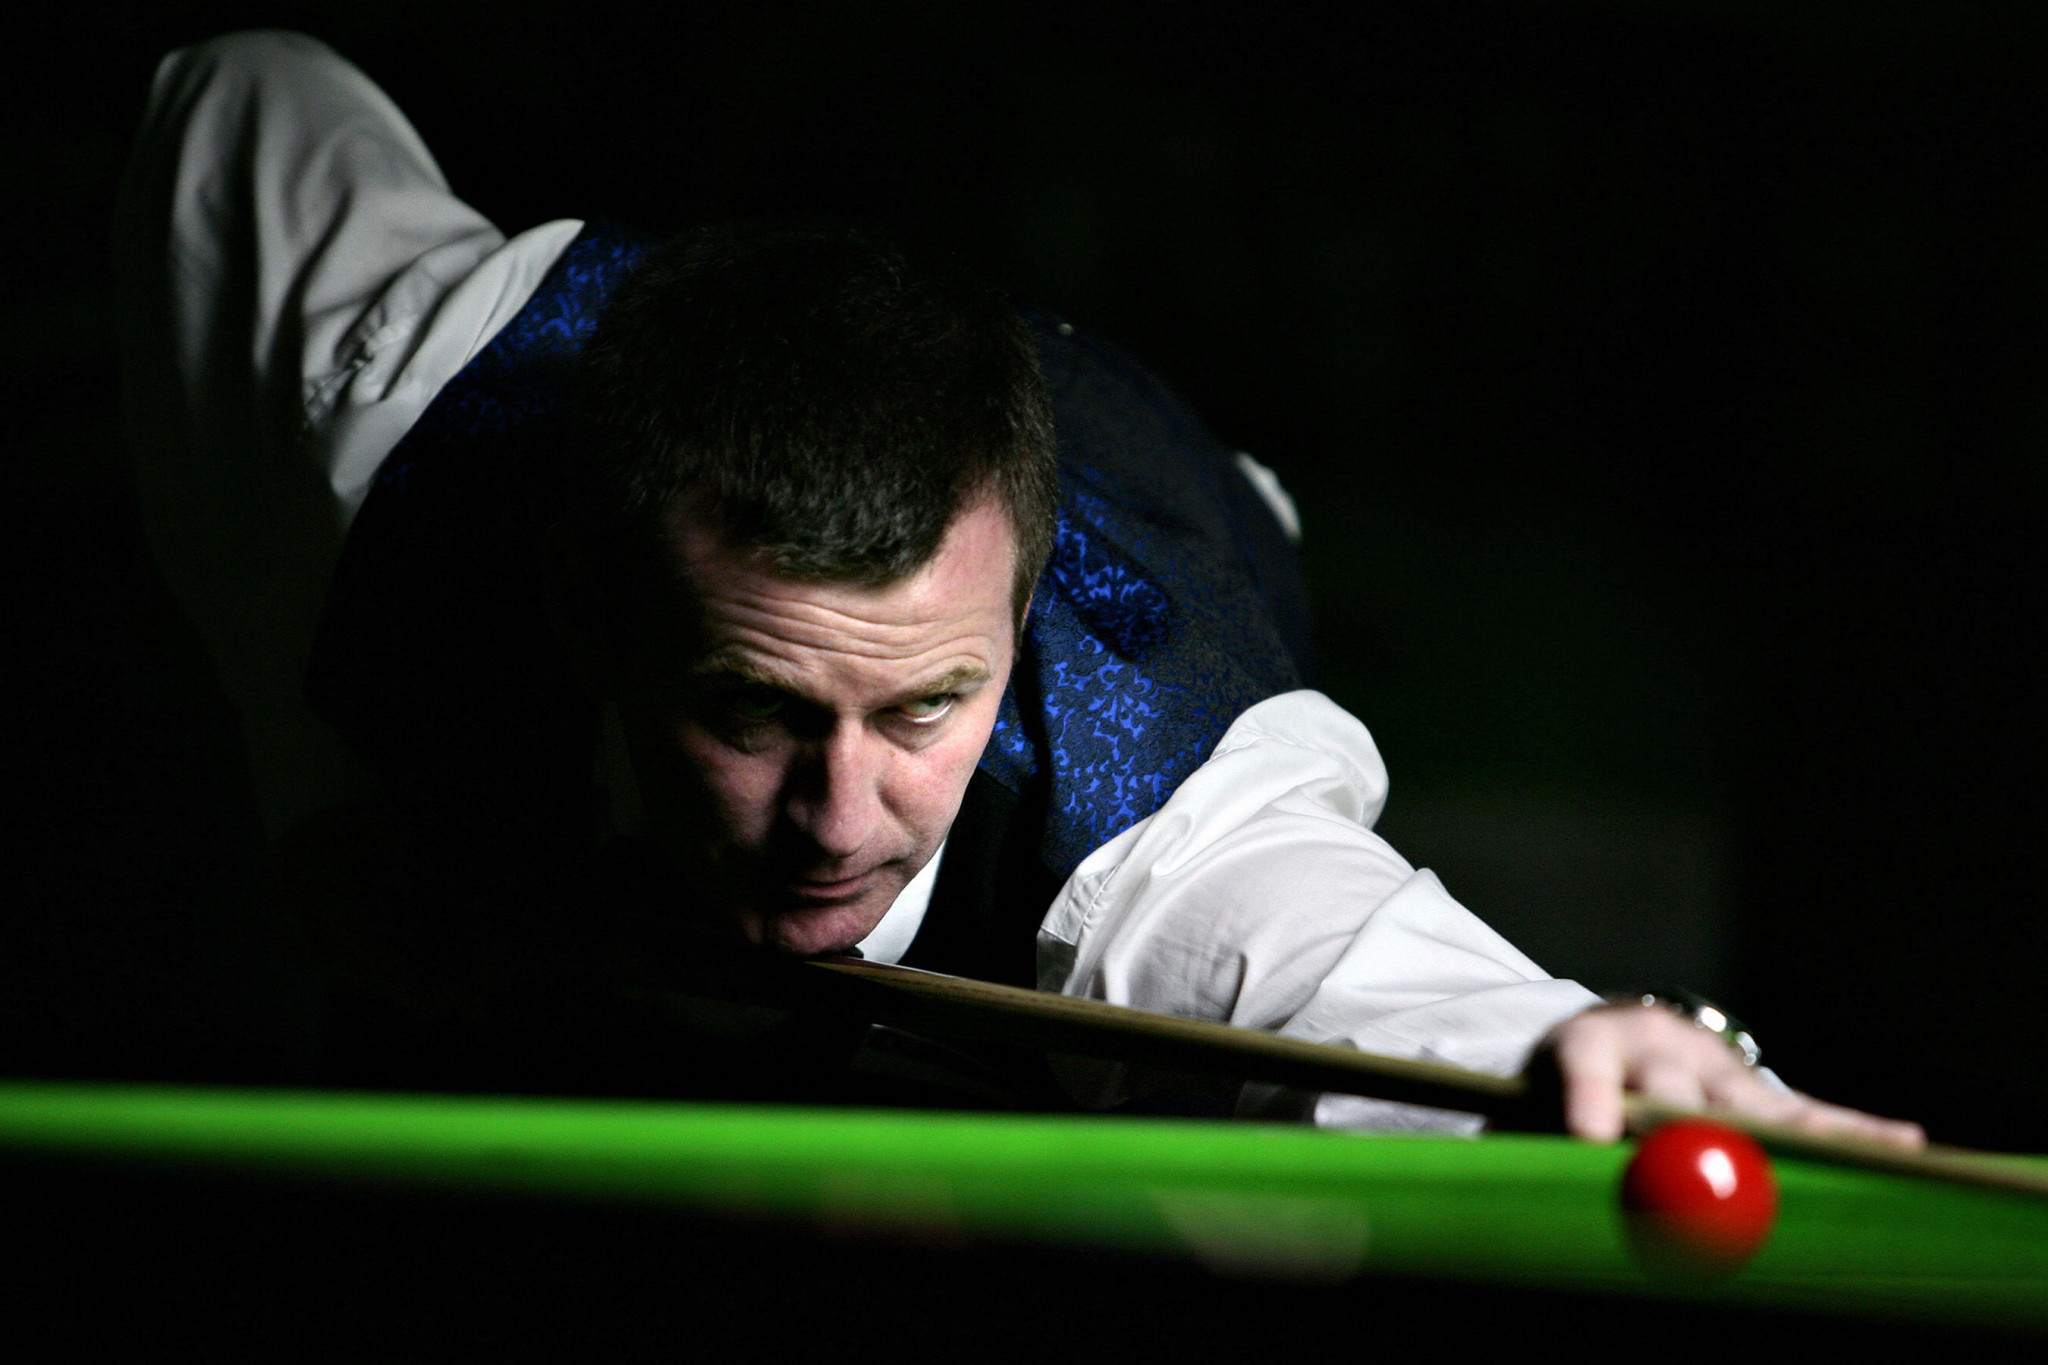 Gilchrist continues perfect start to World Billiards Championship